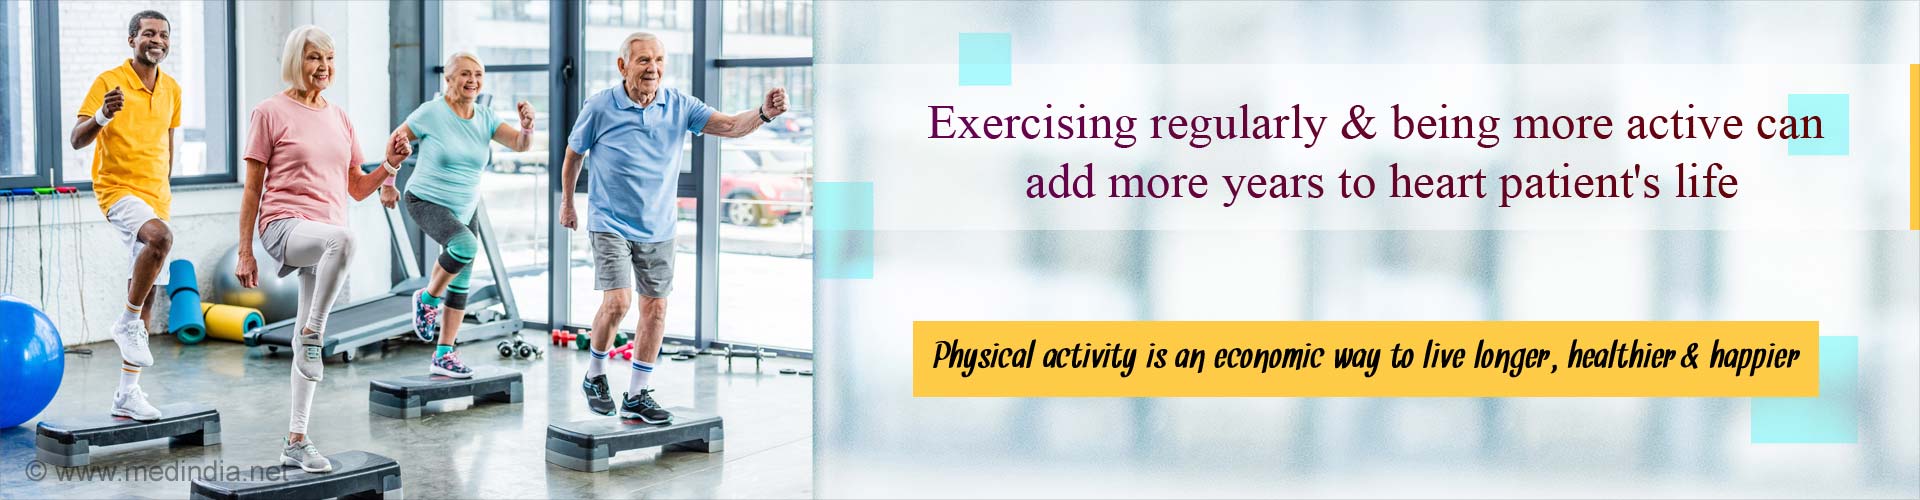 Exercising regularly and being more active can add more years to heart patient's life. Physical activity is an economic way to live longer, healthier and happier.